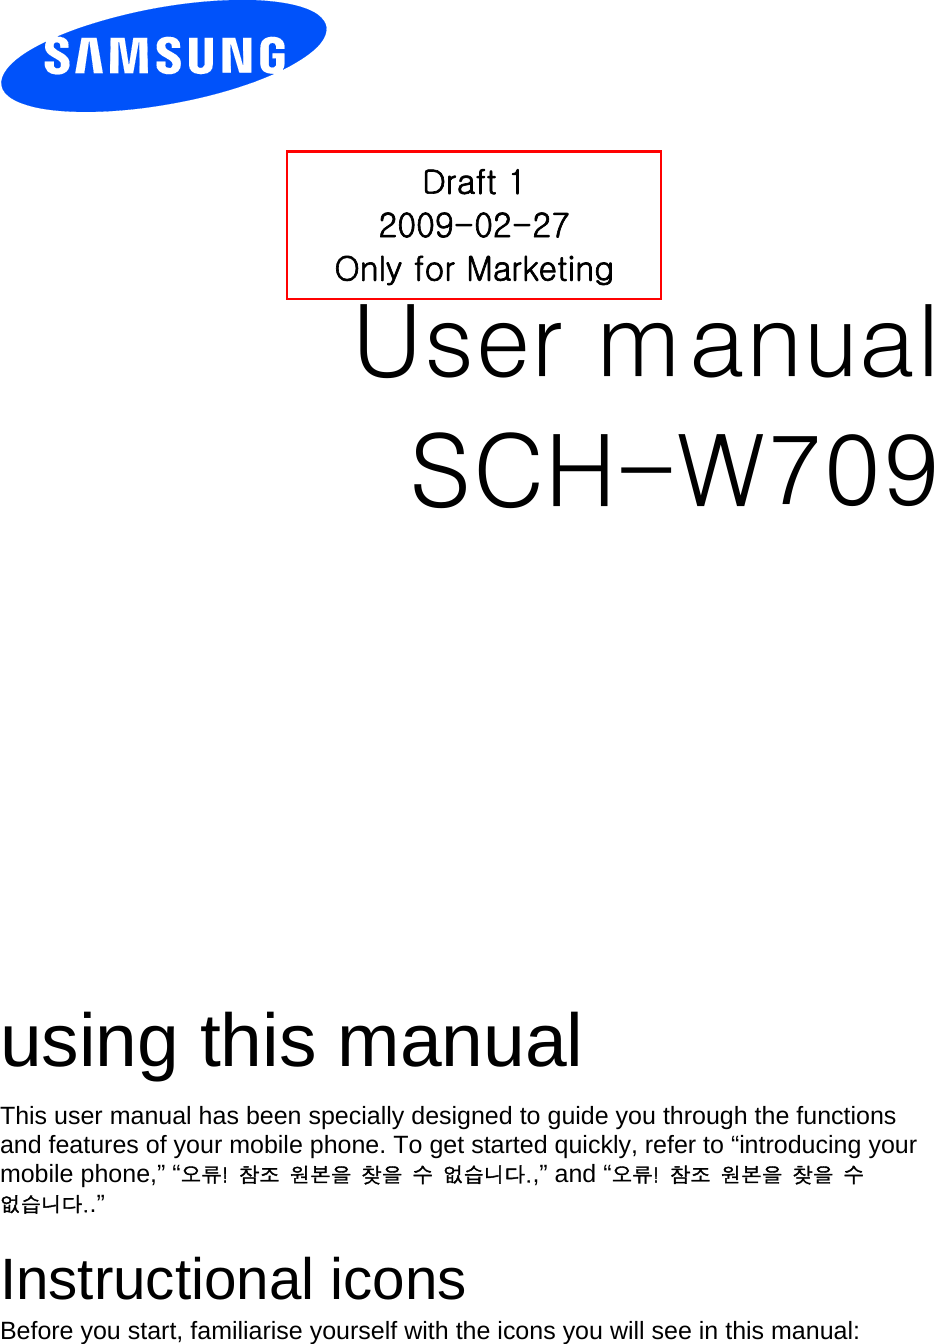            User manual SCH-W709                  using this manual This user manual has been specially designed to guide you through the functions and features of your mobile phone. To get started quickly, refer to “introducing your mobile phone,” “오류!  참조  원본을  찾을  수  없습니다.,” and “오류!  참조  원본을  찾을  수 없습니다..”  Instructional icons Before you start, familiarise yourself with the icons you will see in this manual:   Draft 1 2009-02-27 Only for Marketing 